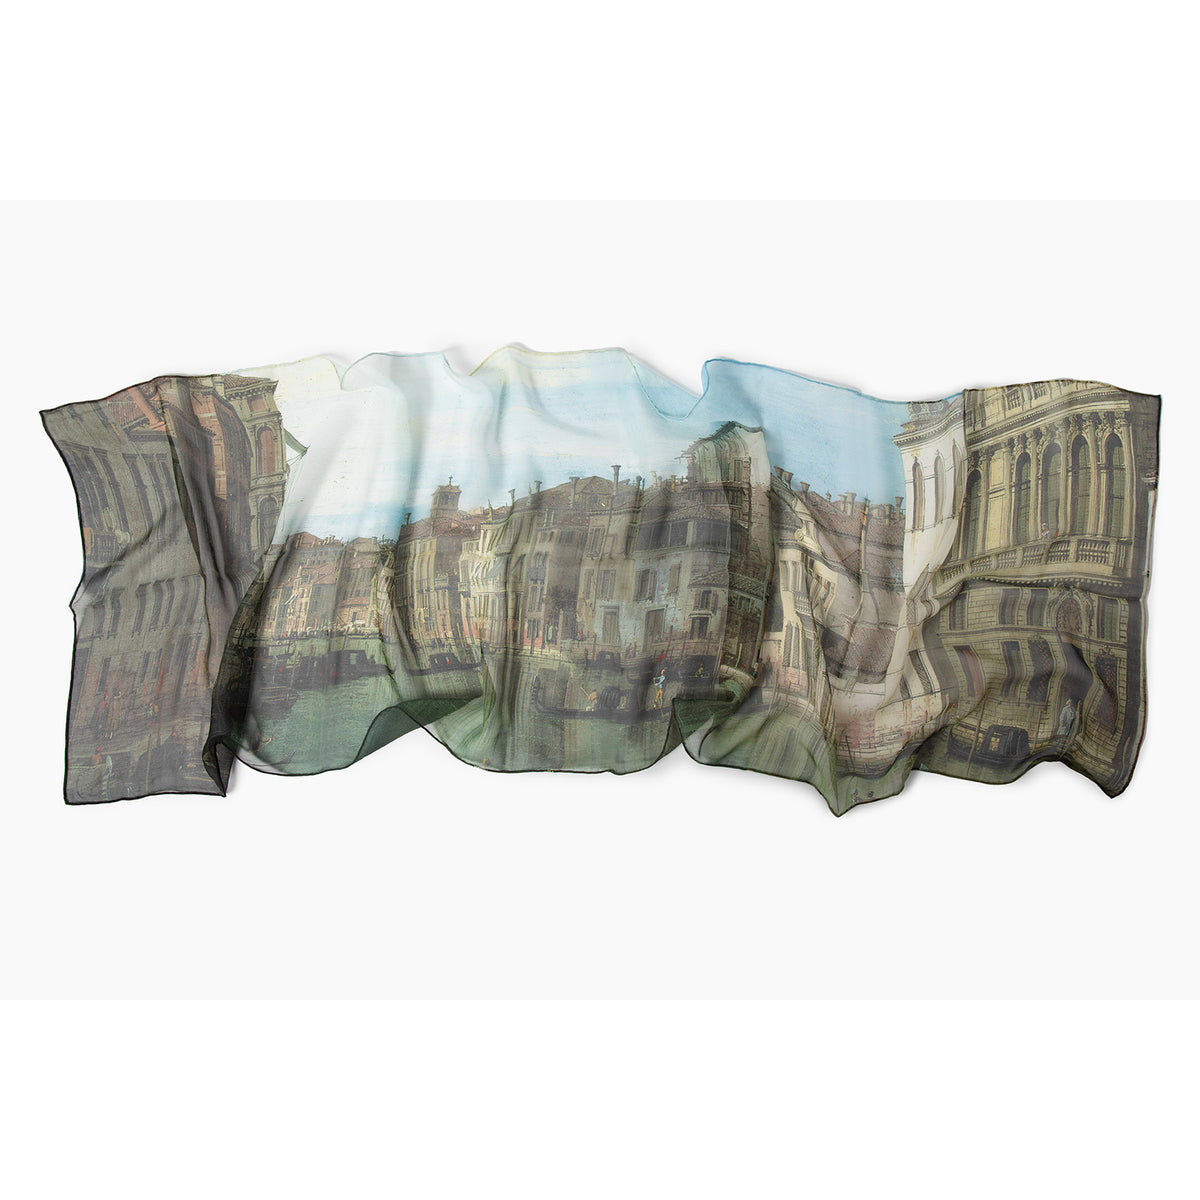 Canaletto - The Grand Canal in Venice - Silk Scarf